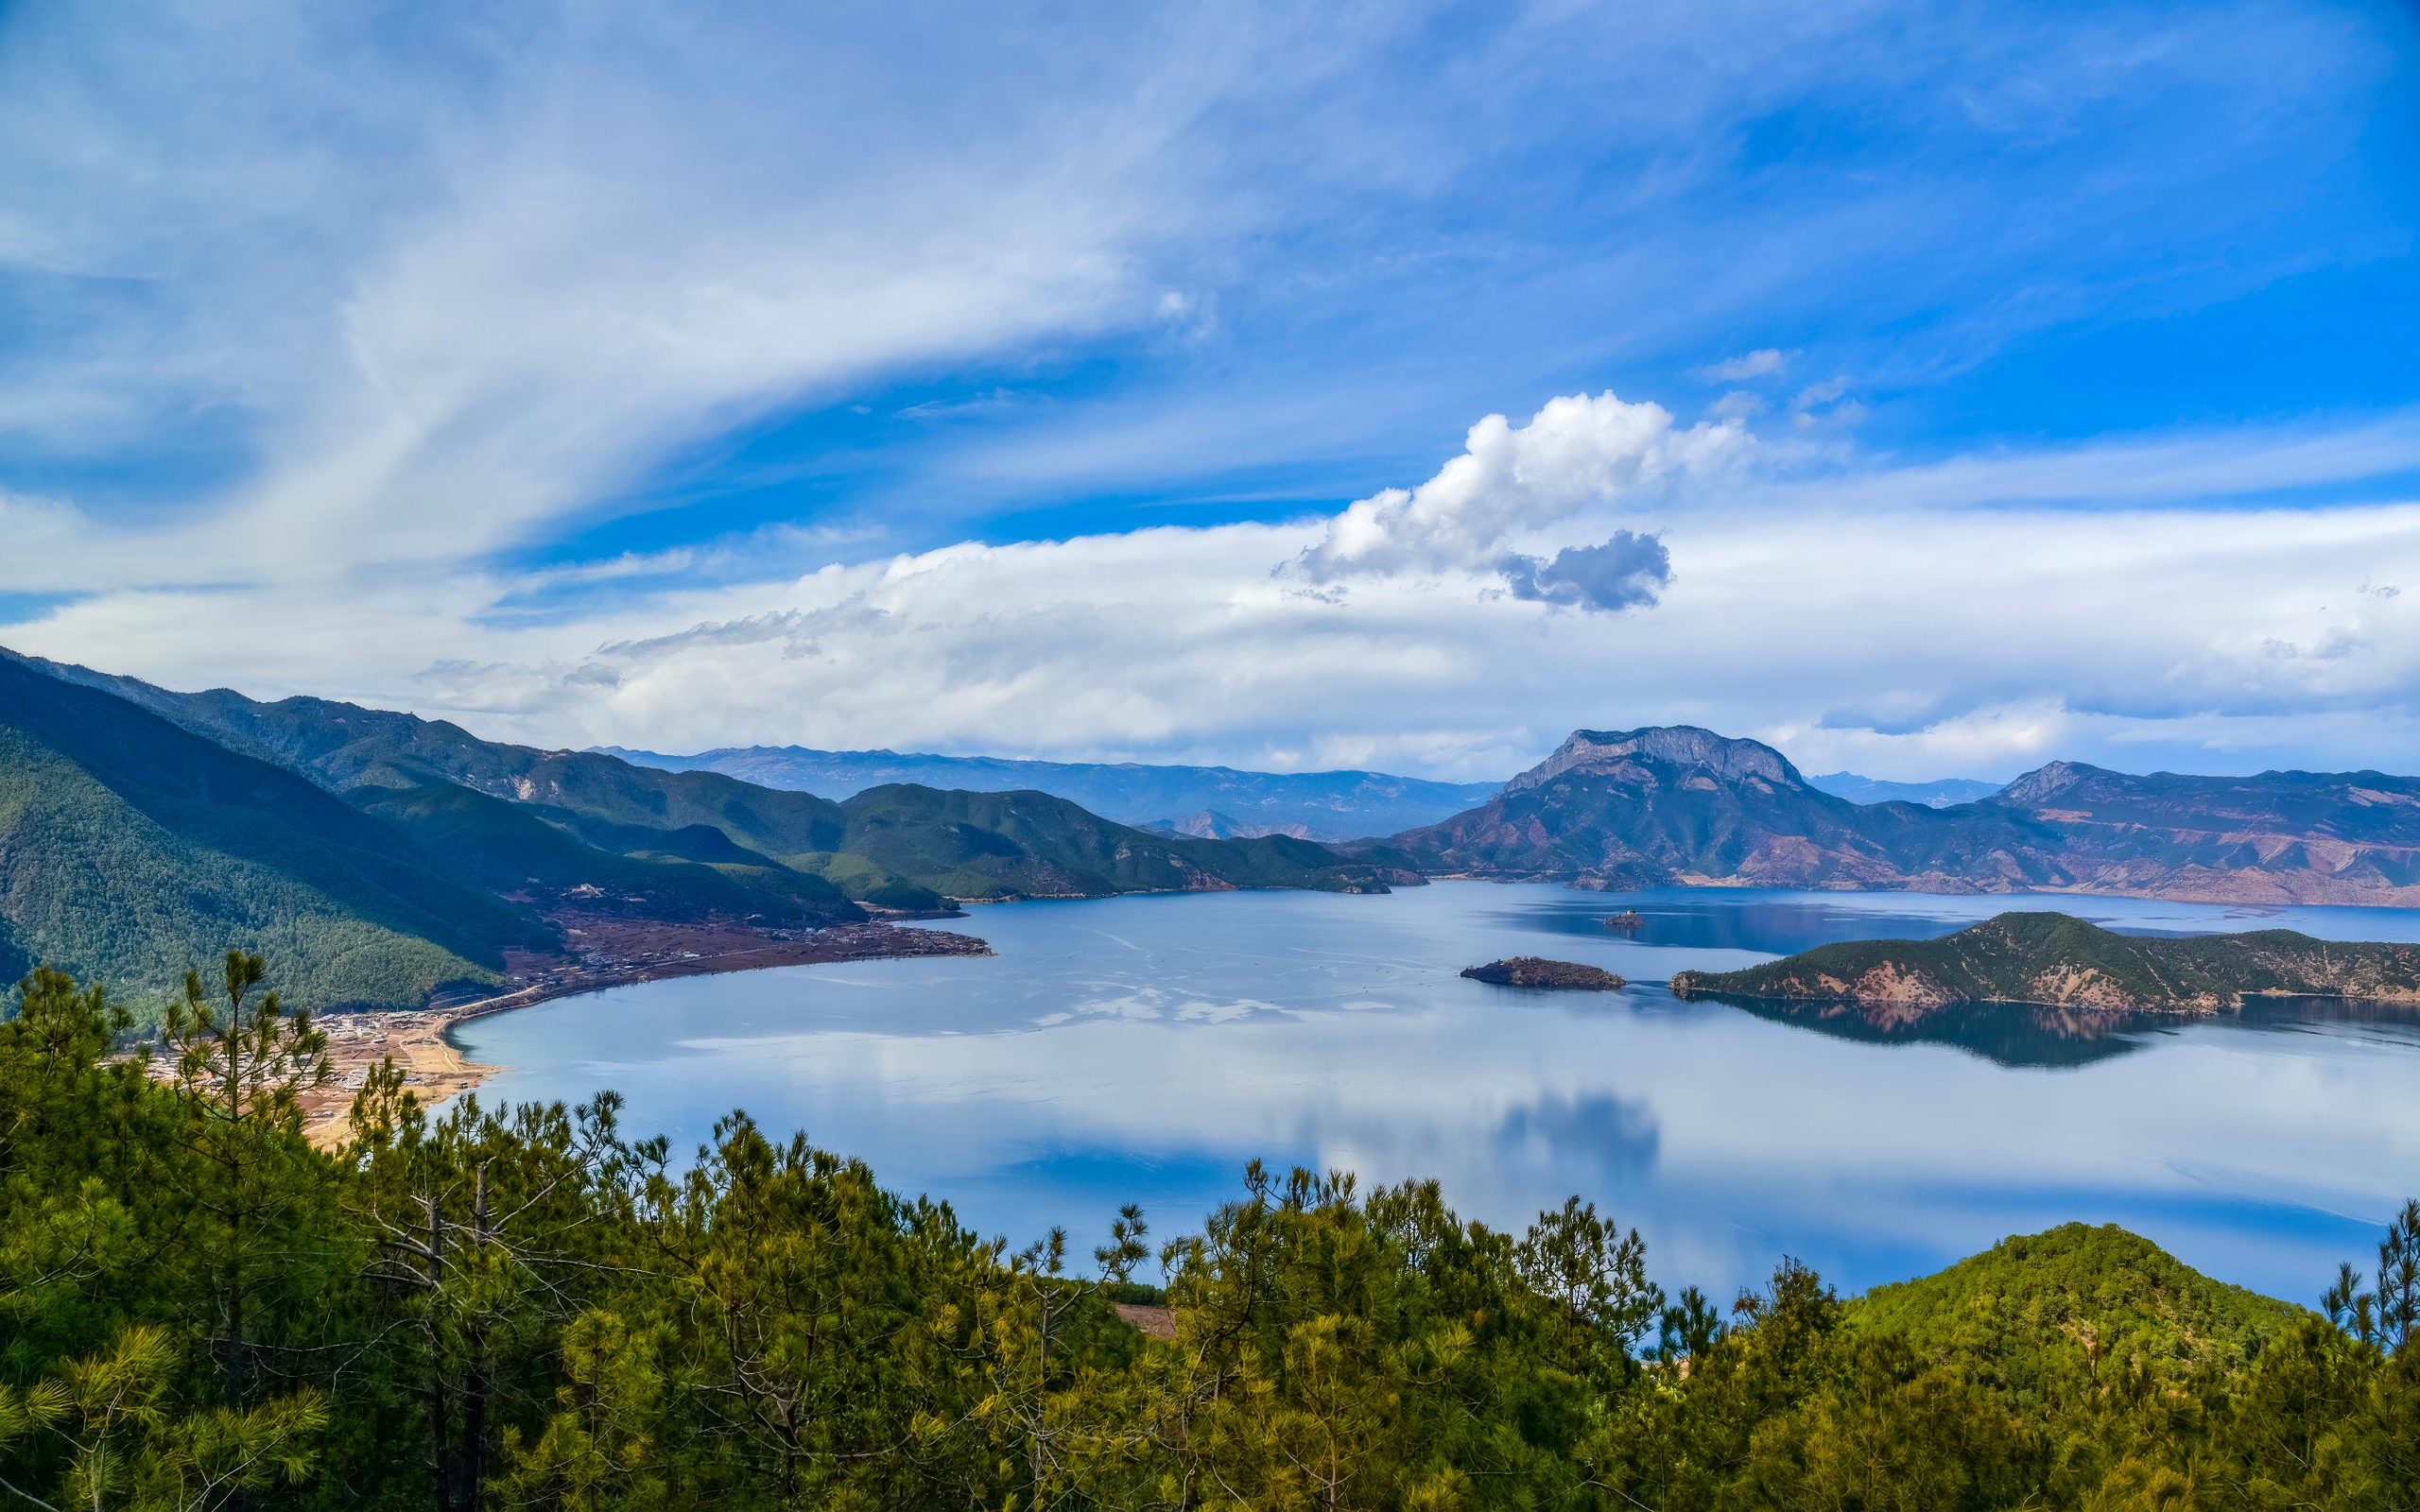 General 2560x1600 nature landscape mountains trees clouds sky far view island lake Yunnan (China)